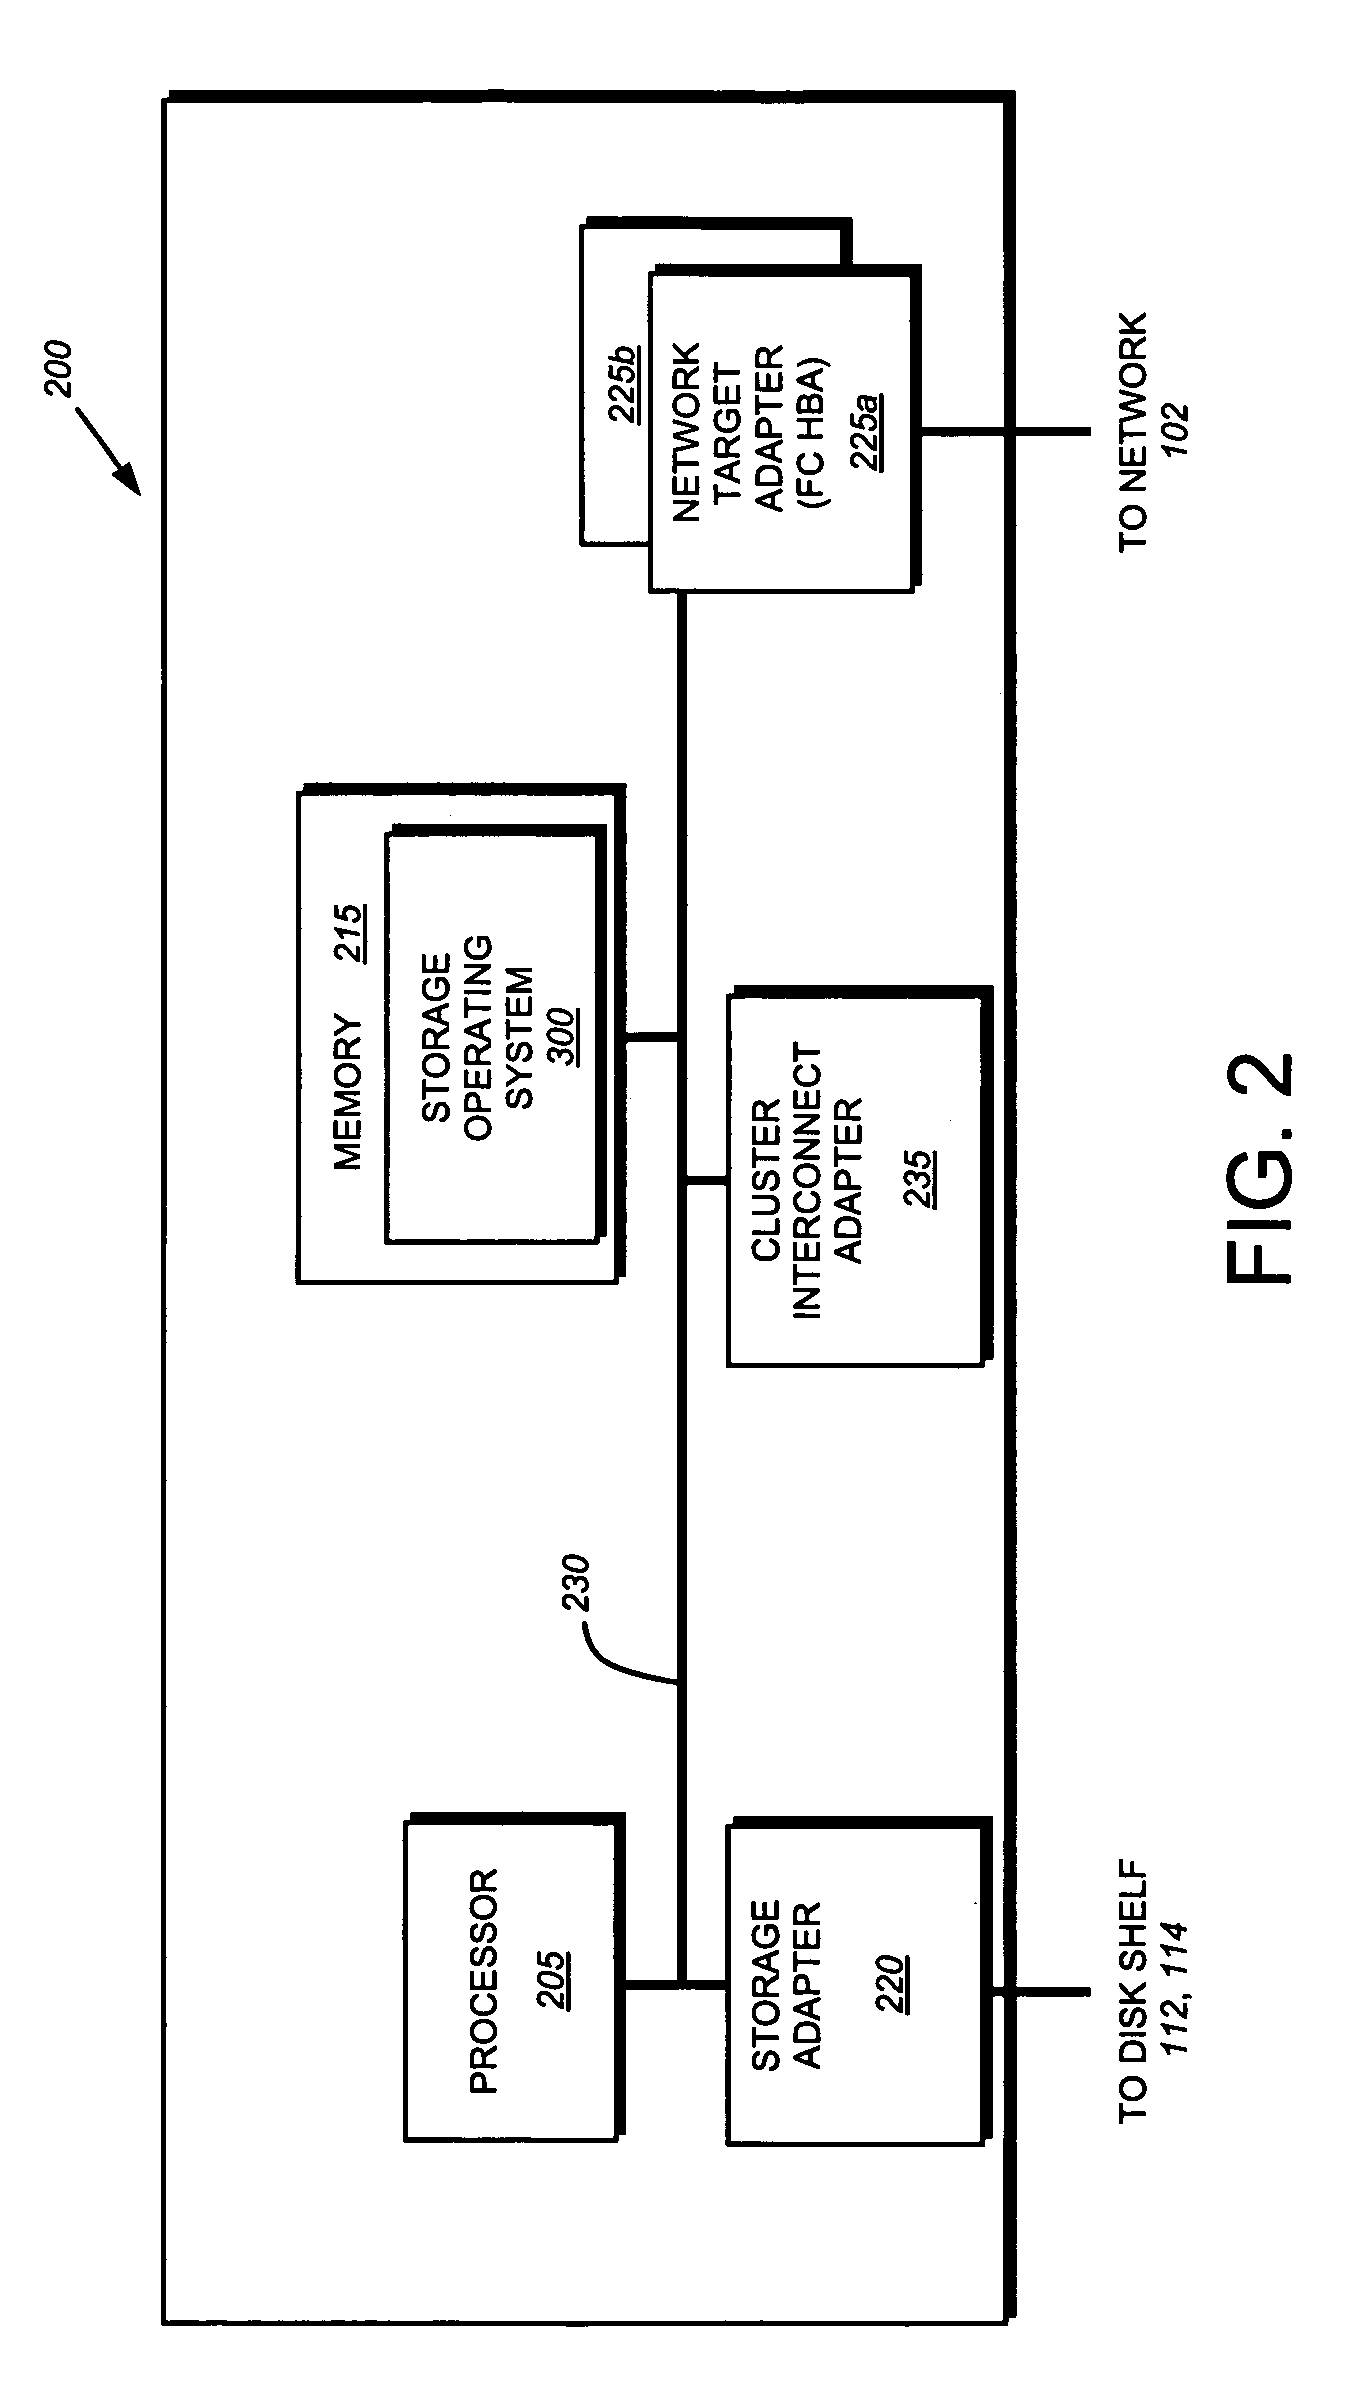 System and method for proxying data access commands in a clustered storage system